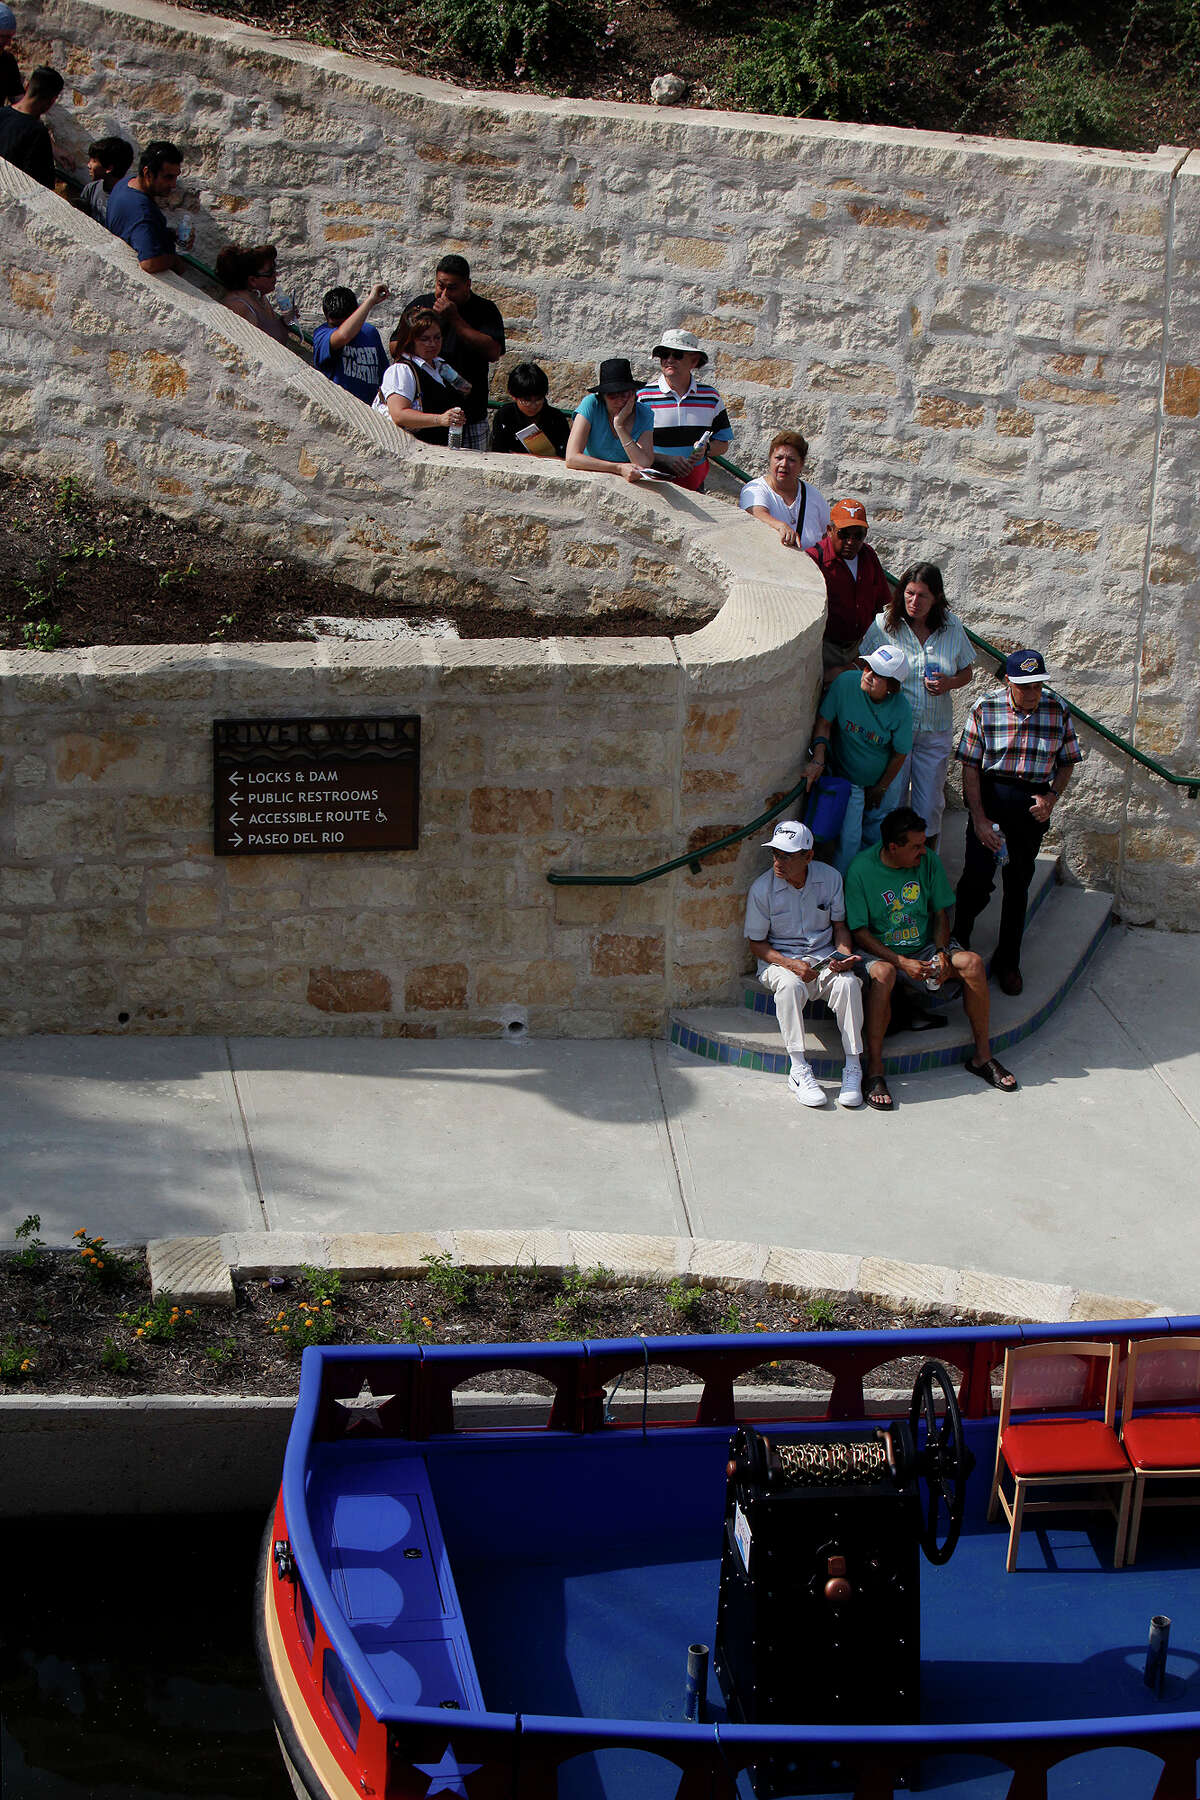 The line begins for the first people holding tickets for a ride on the first Rio San Antonio Cruise for the public during the grand opening celebration of the San Antonio Museum Reach extension on Saturday, May 30, 2009. LISA KRANTZ/lkrantz@express-news.net